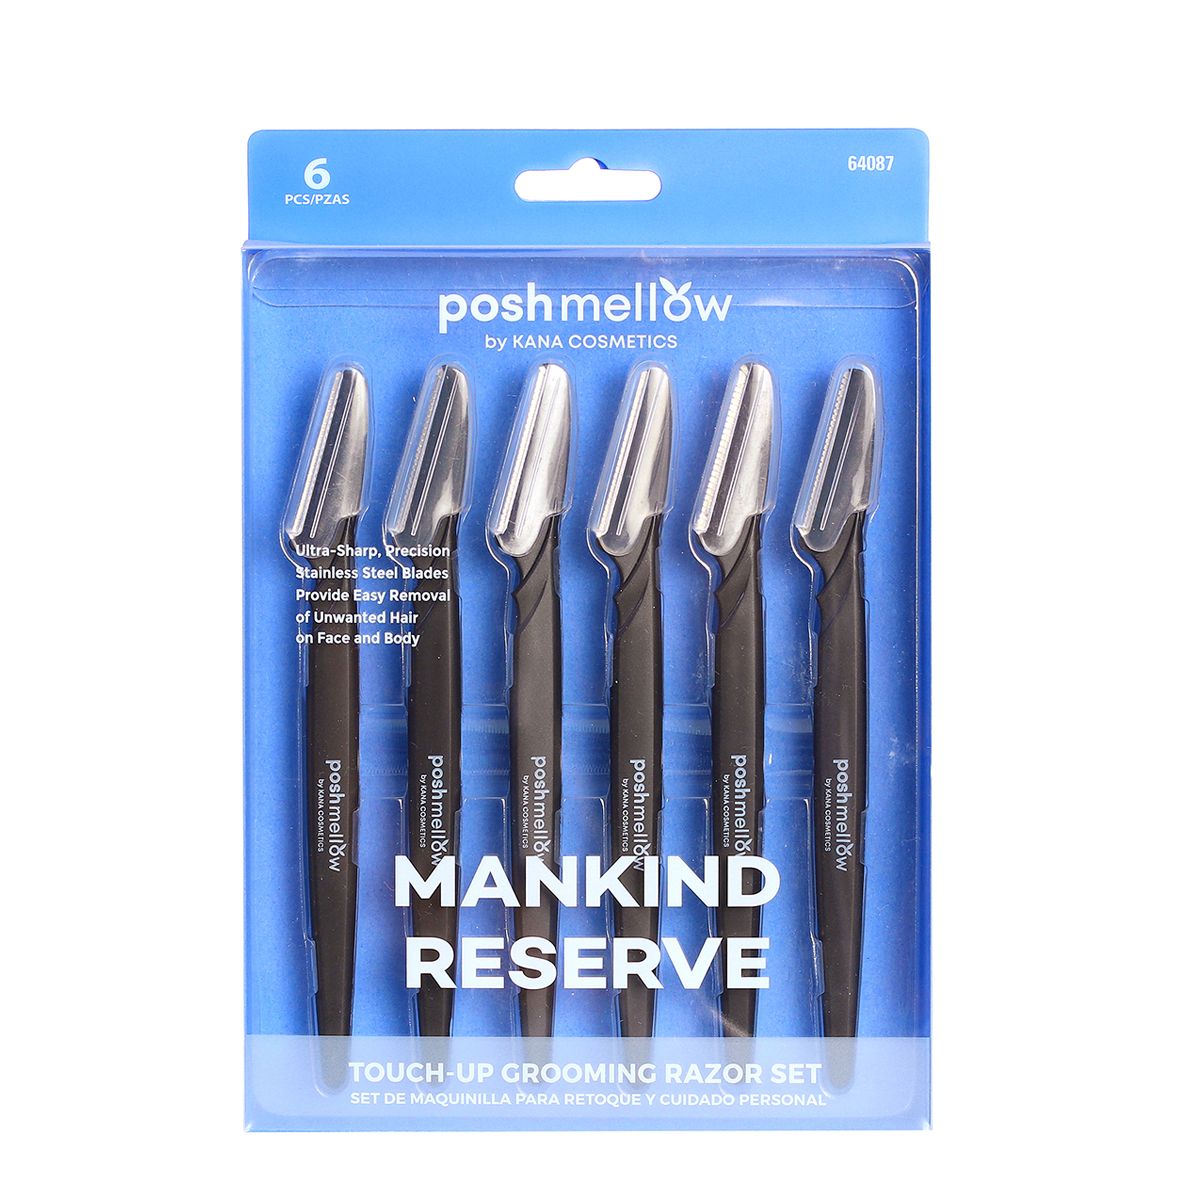 Mankind Reserve: Touch-Up Grooming Set (6pcs)